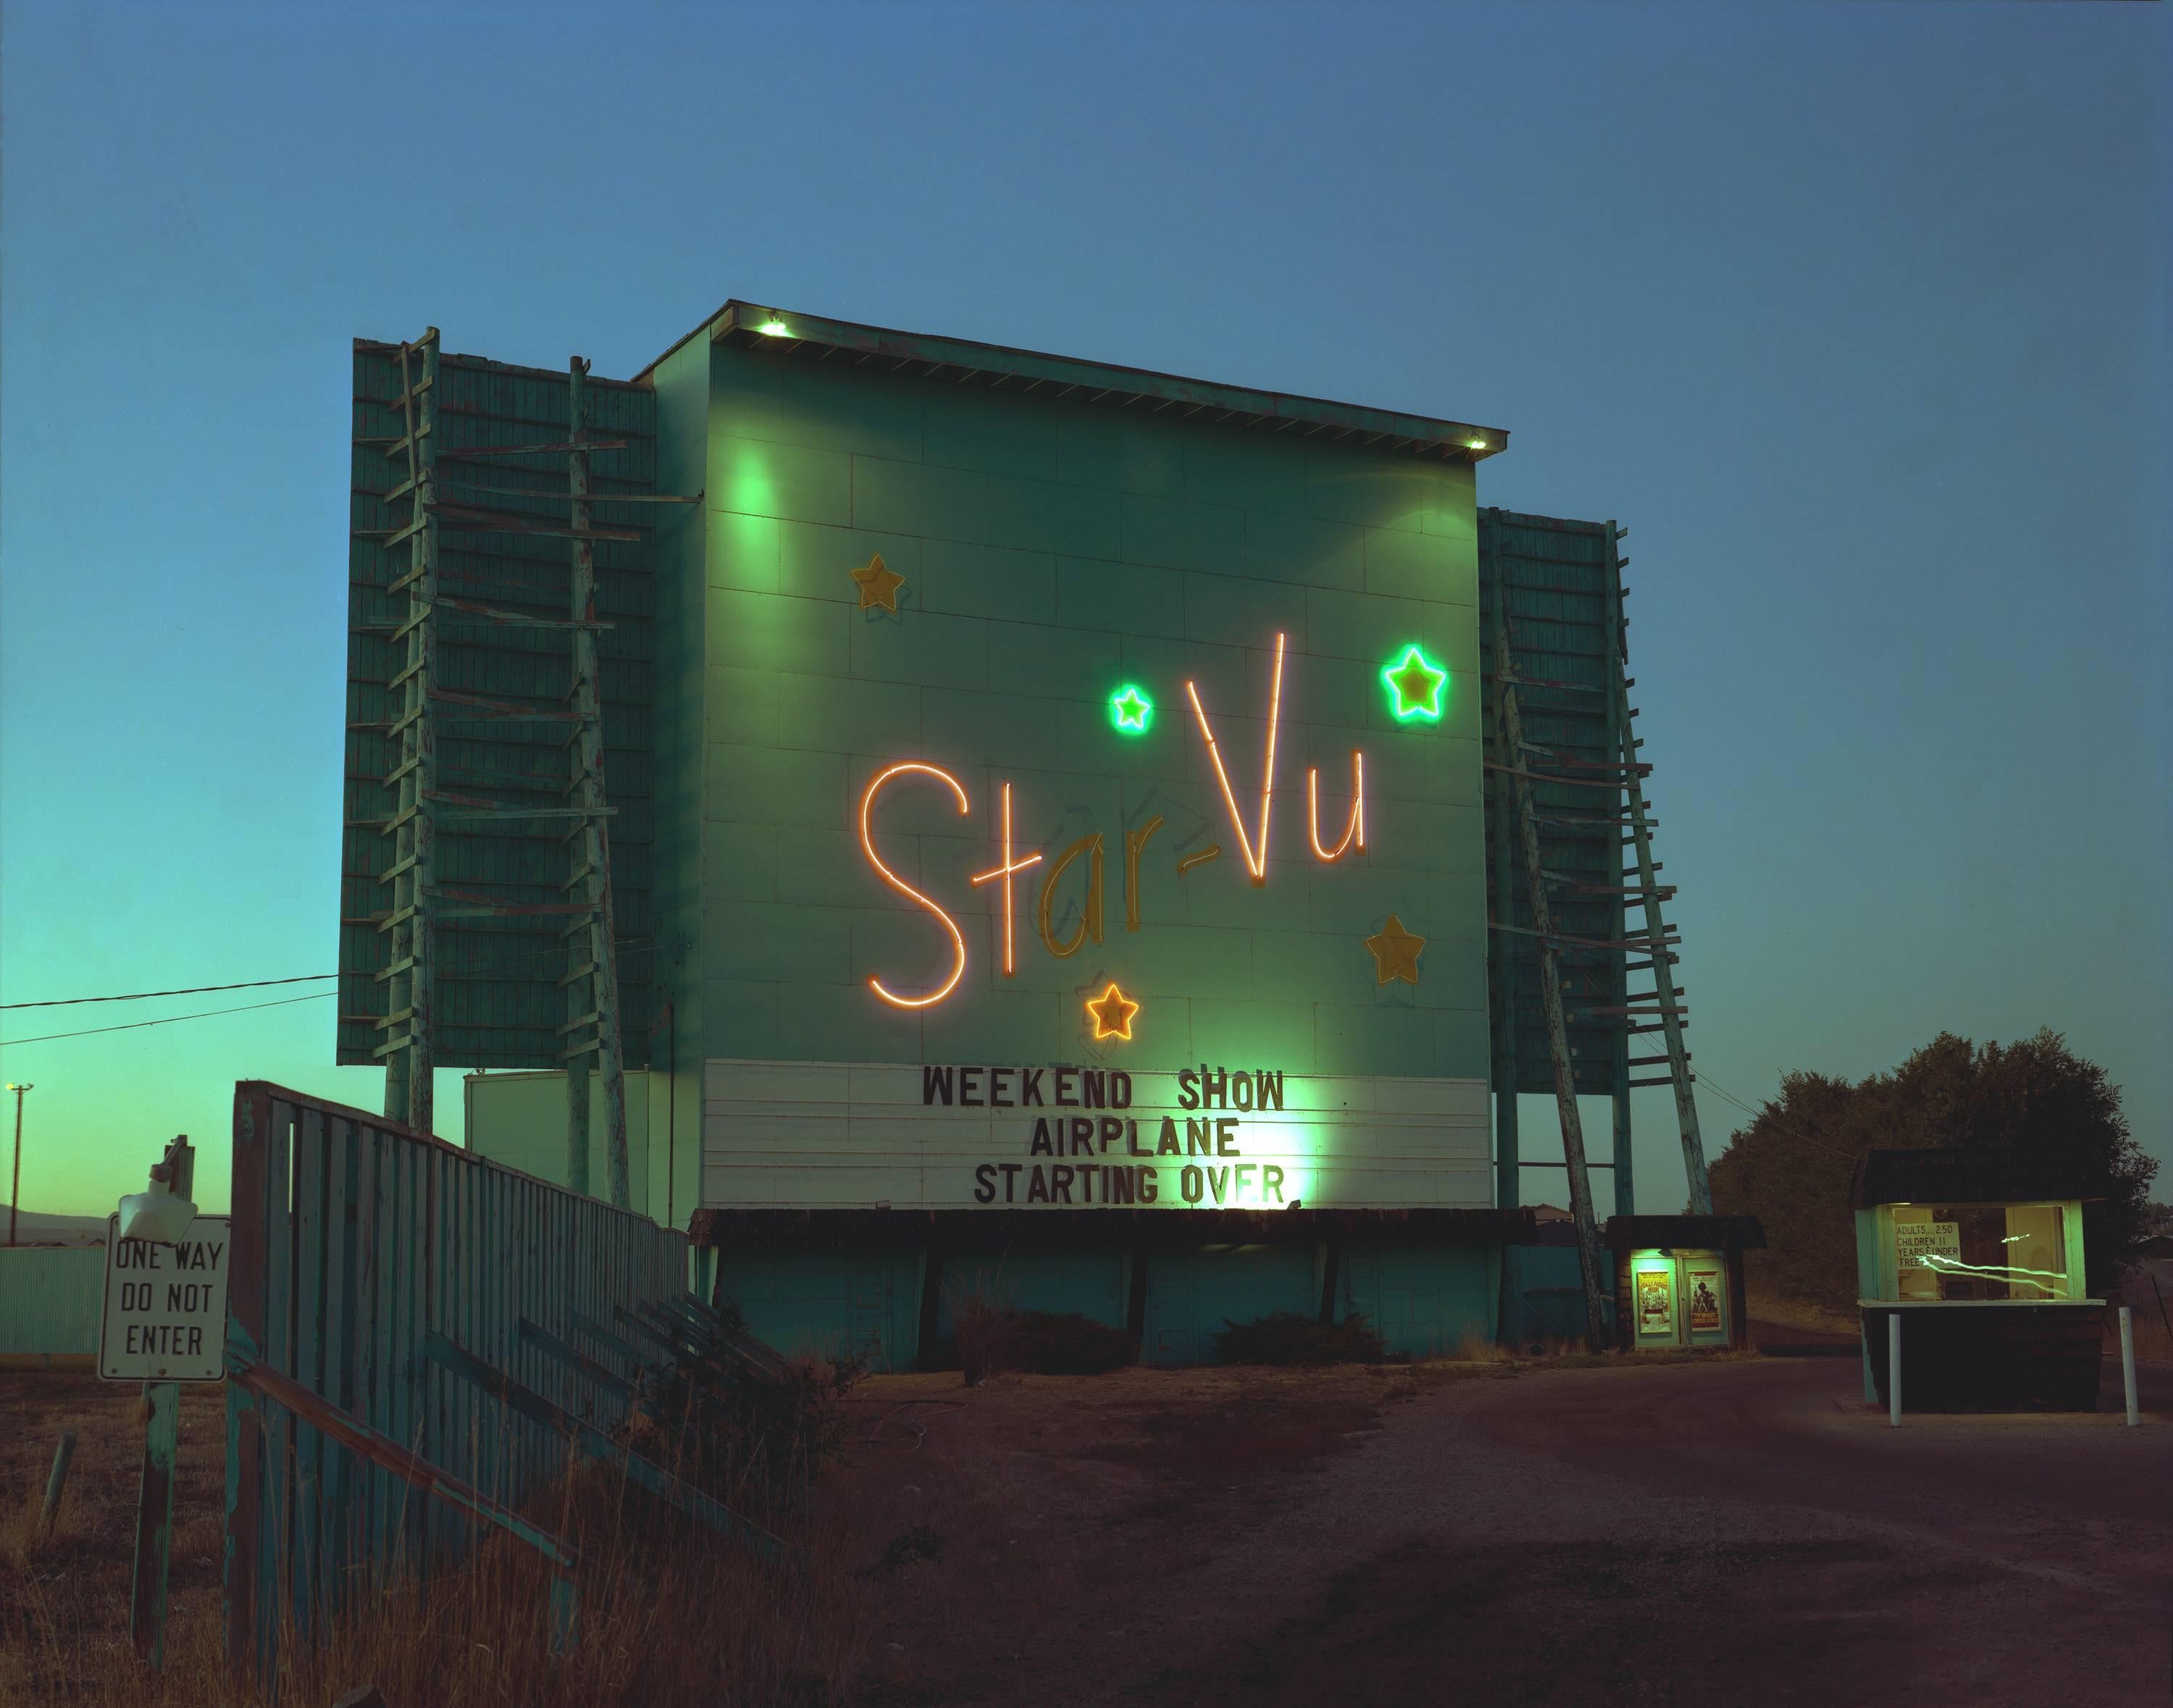 Steve Fitch Color Photograph - Star-Vu Drive-in theater, Longmont, Colorado; July, 1980 